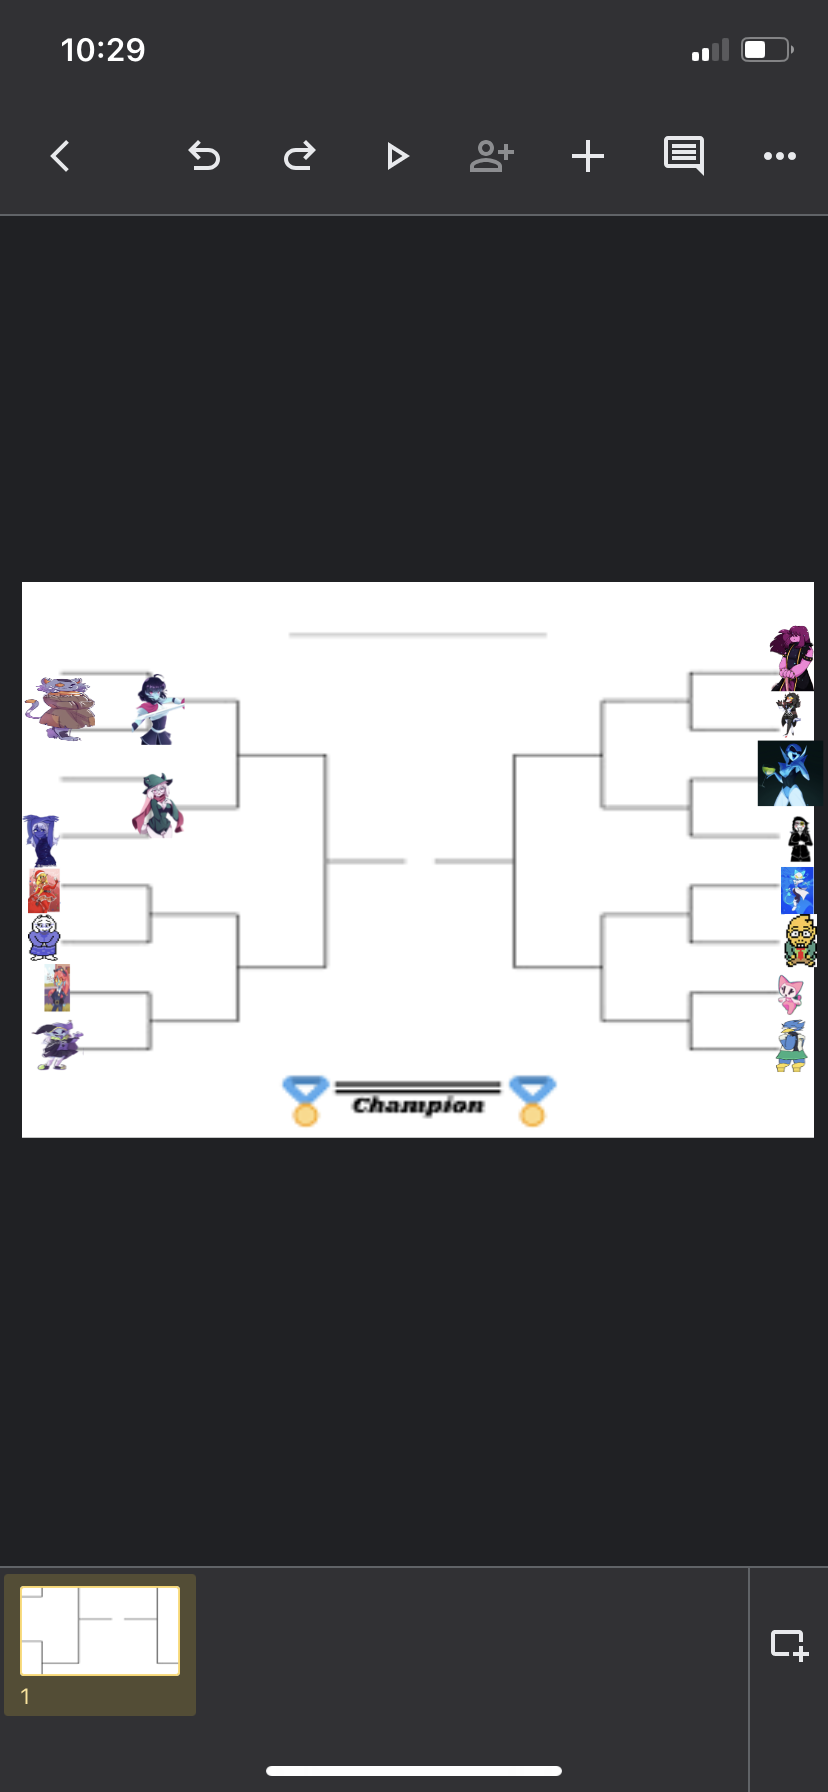 here’s part 3 of the tournament nowel or toriel deltarune o